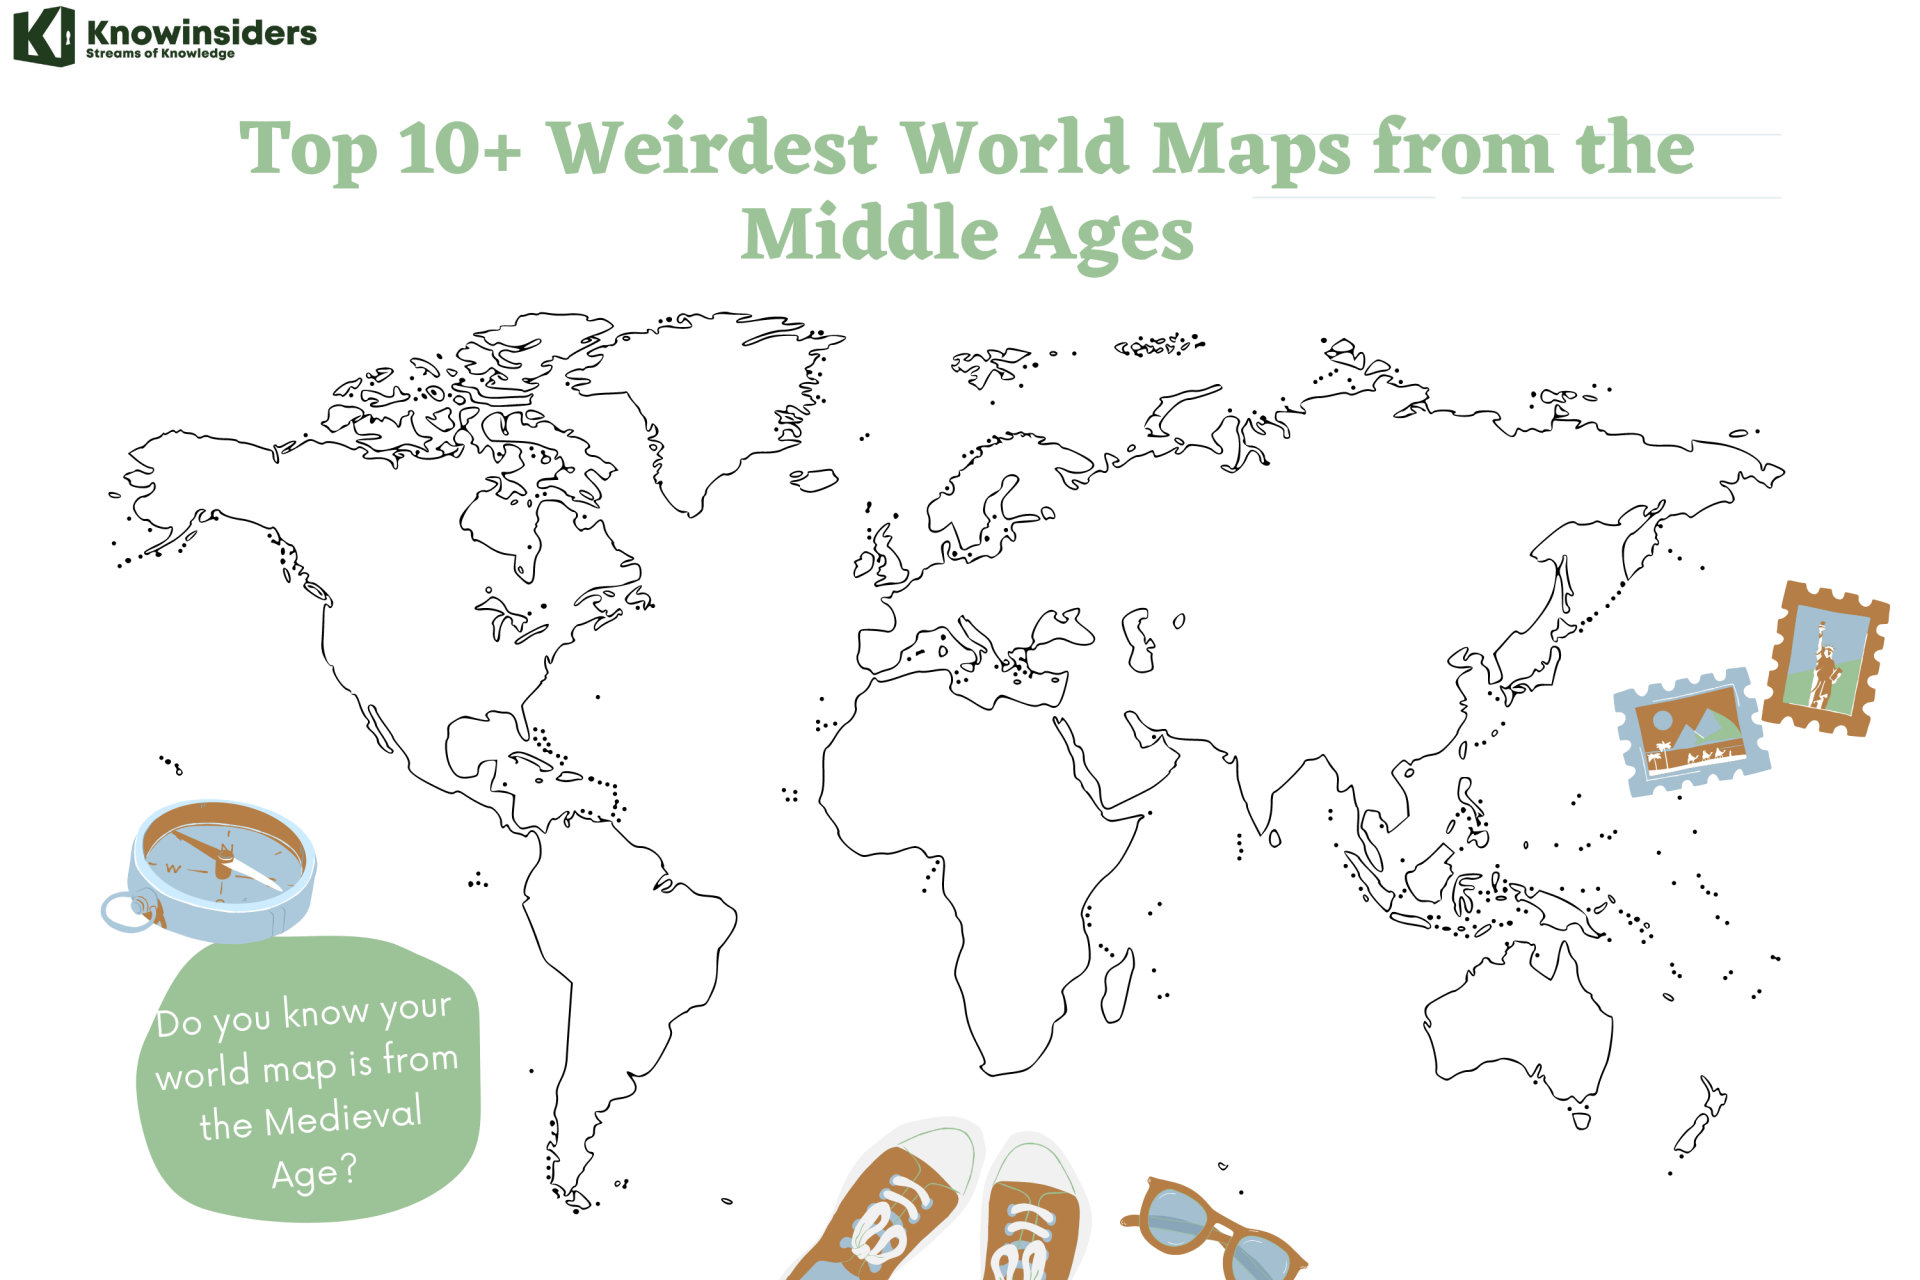 Top 10+ Weirdest World Maps from the Middle Ages